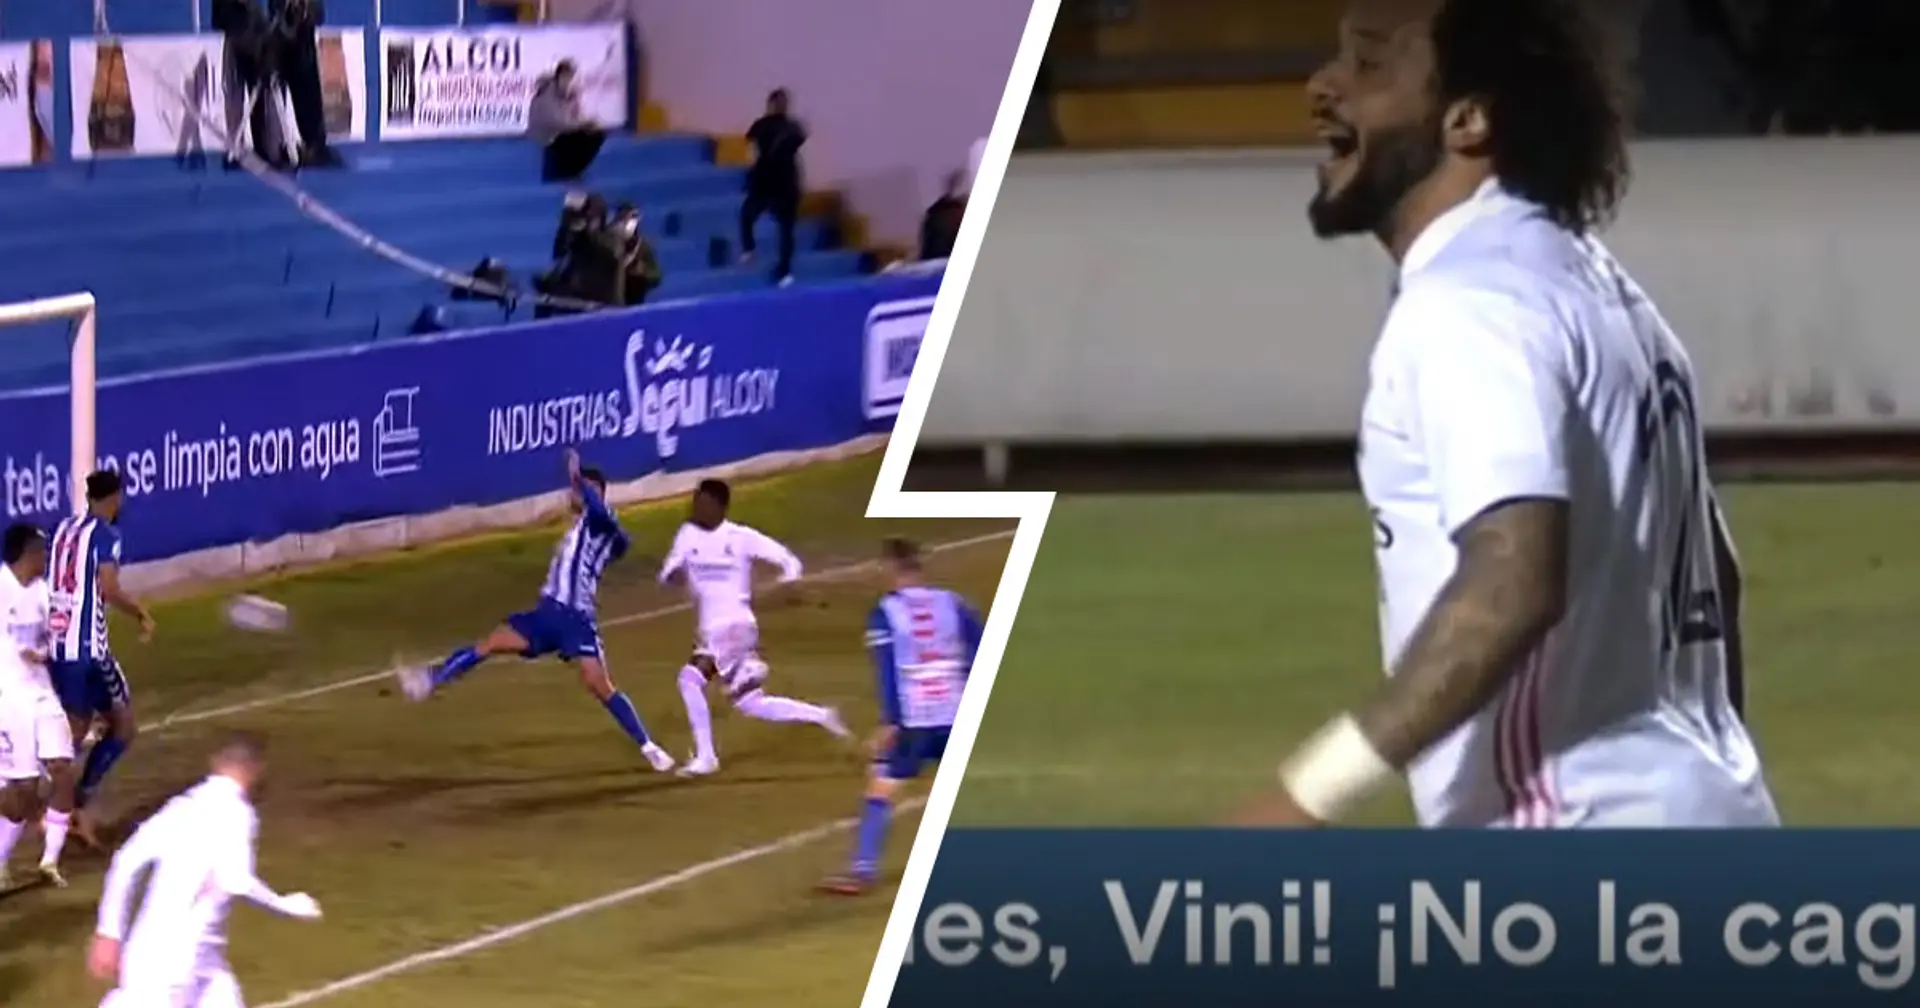 'Don't mess this up, Vini!': Marcelo spotted urging Vinicius to mark Jose Solbes seconds before Alcoyano's equaliser